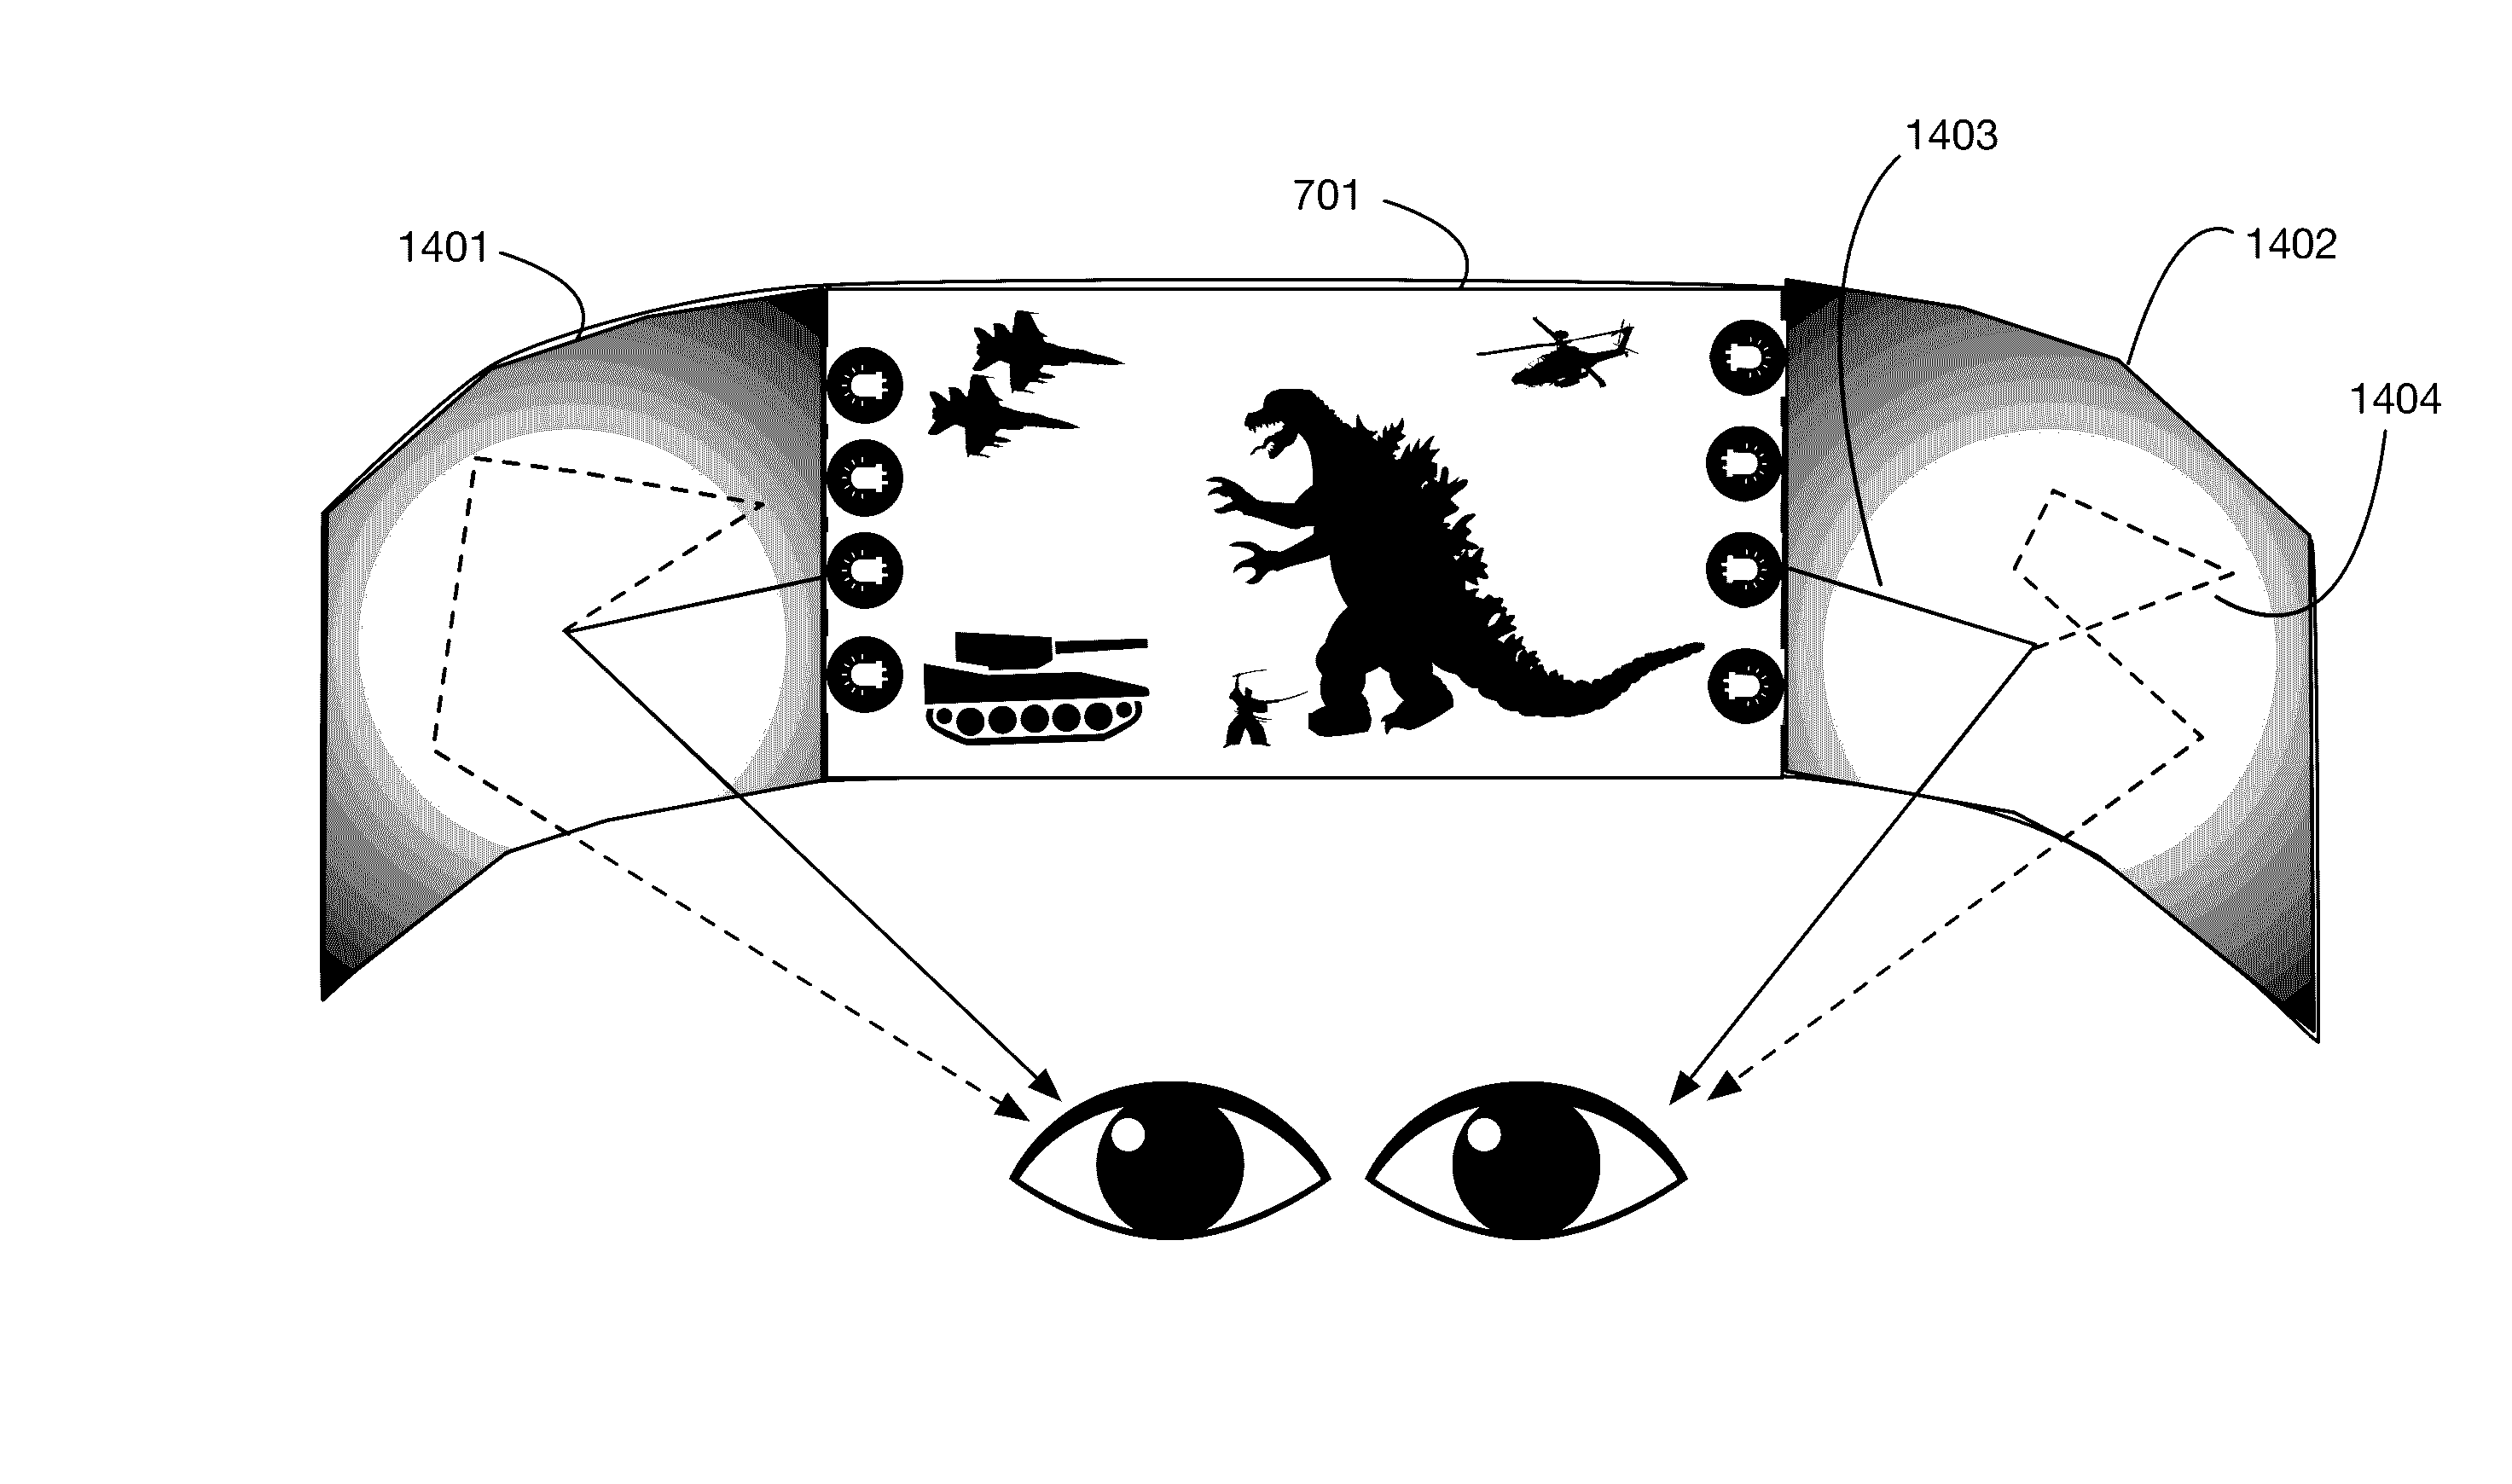 Peripheral field-of-view illumination system for a head mounted display